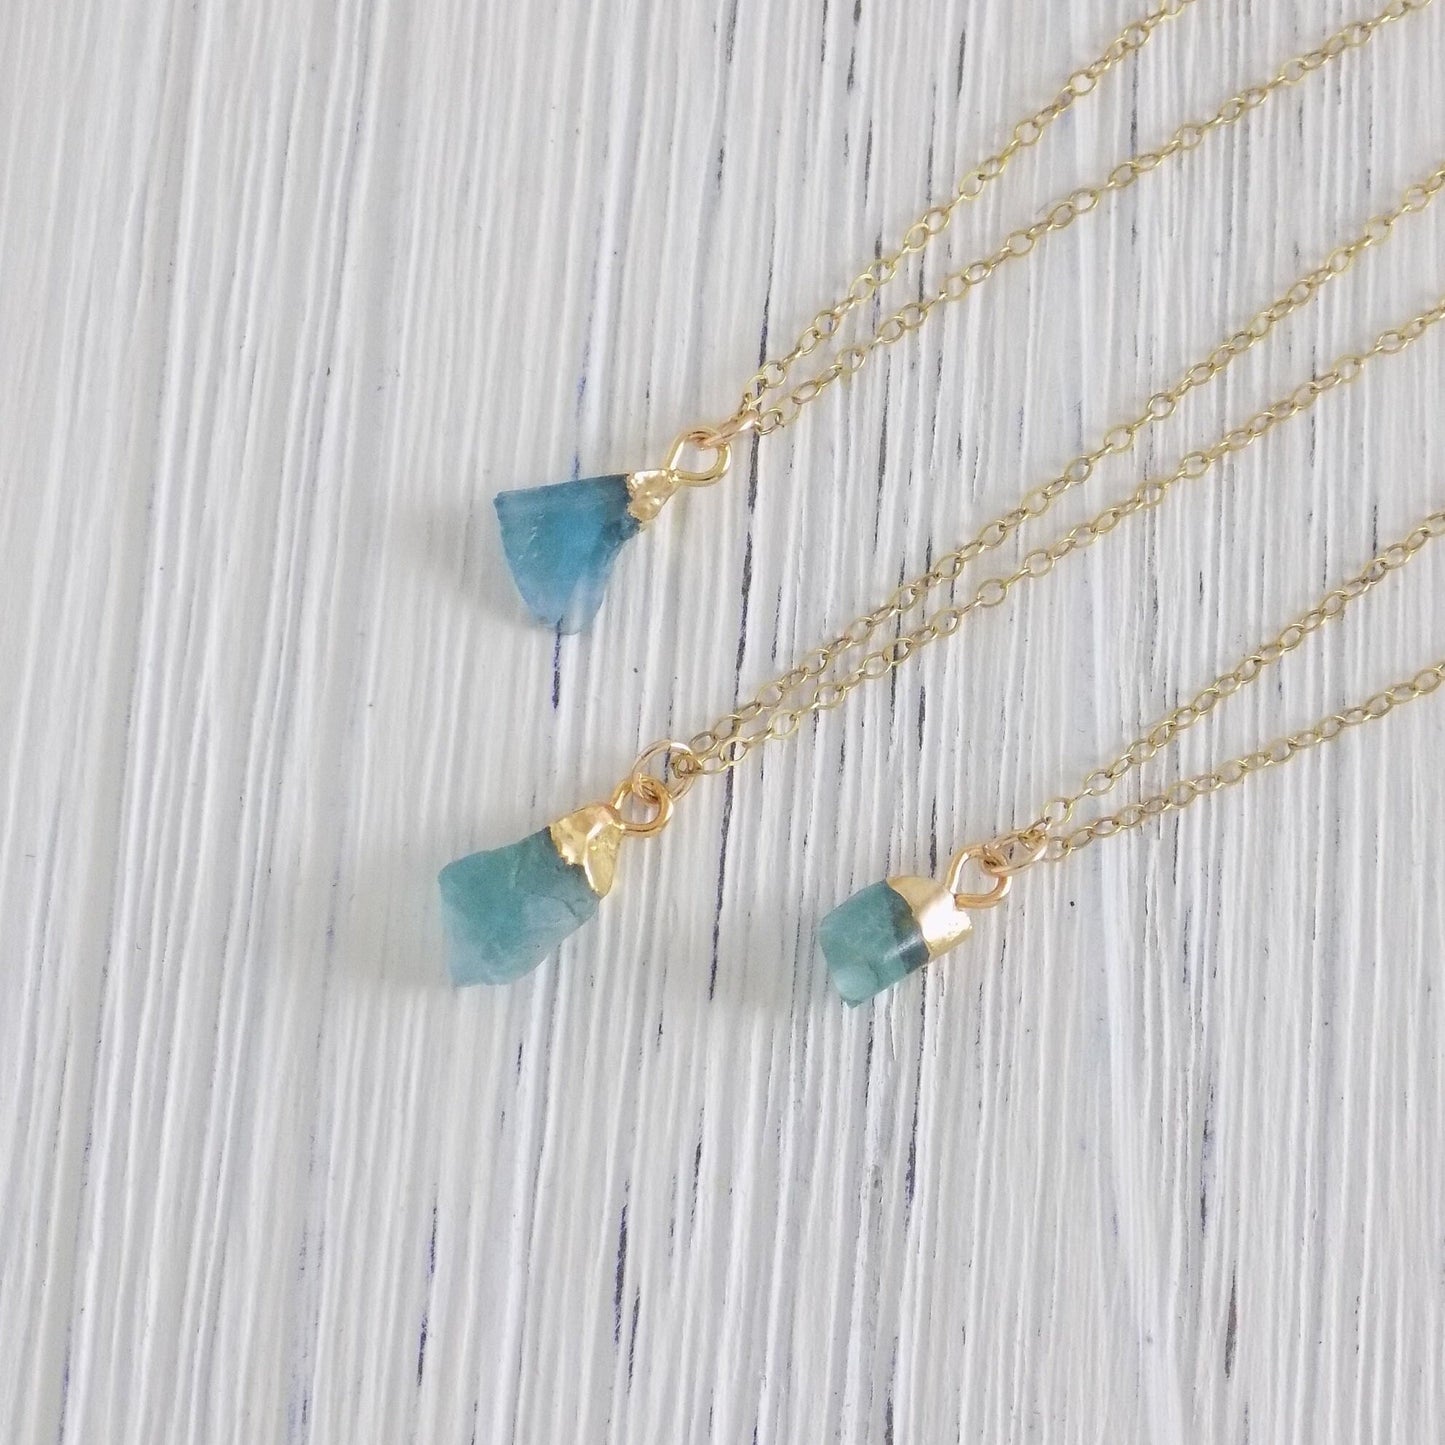 Tiny Raw Fluorite Gemstone Necklace on 14K Gold Filled Chain, M4-36